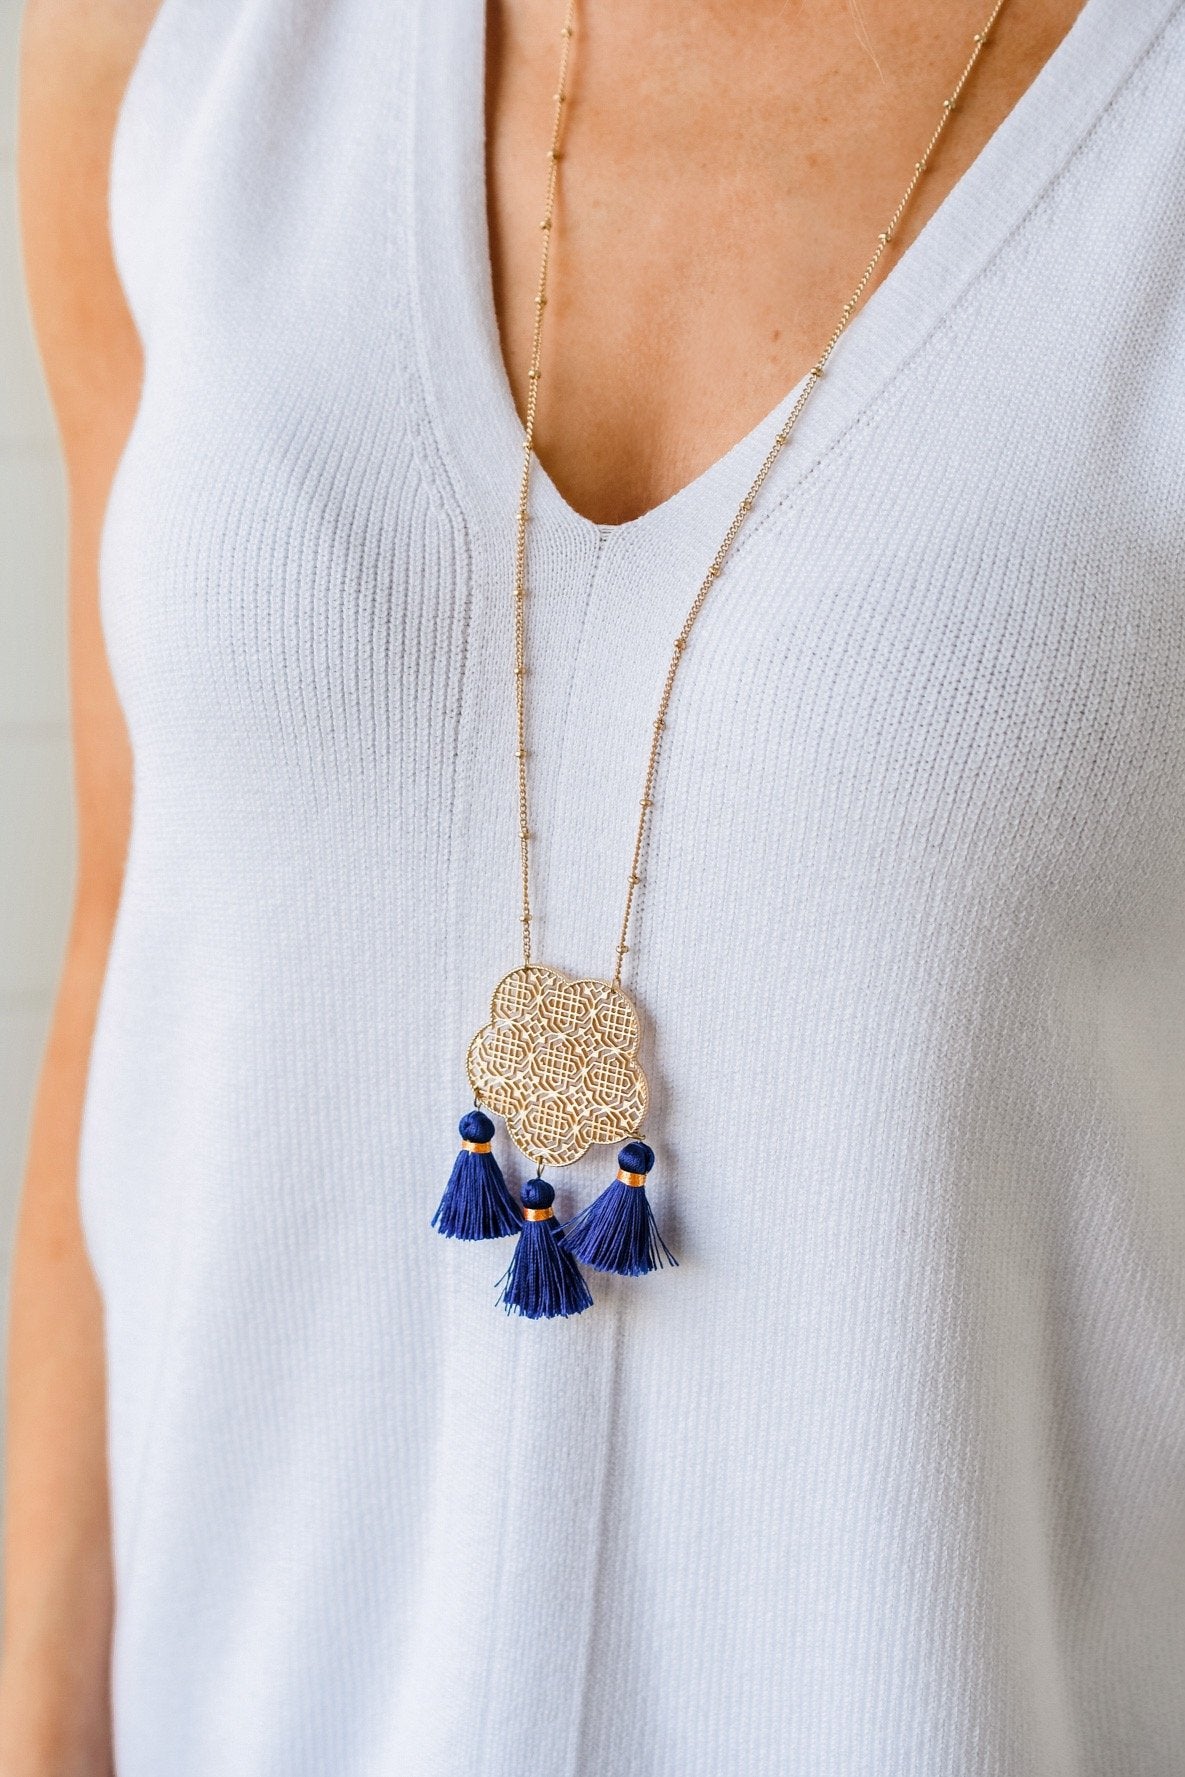 Charmingly Cheerful Pendant Necklace- Dark Blue